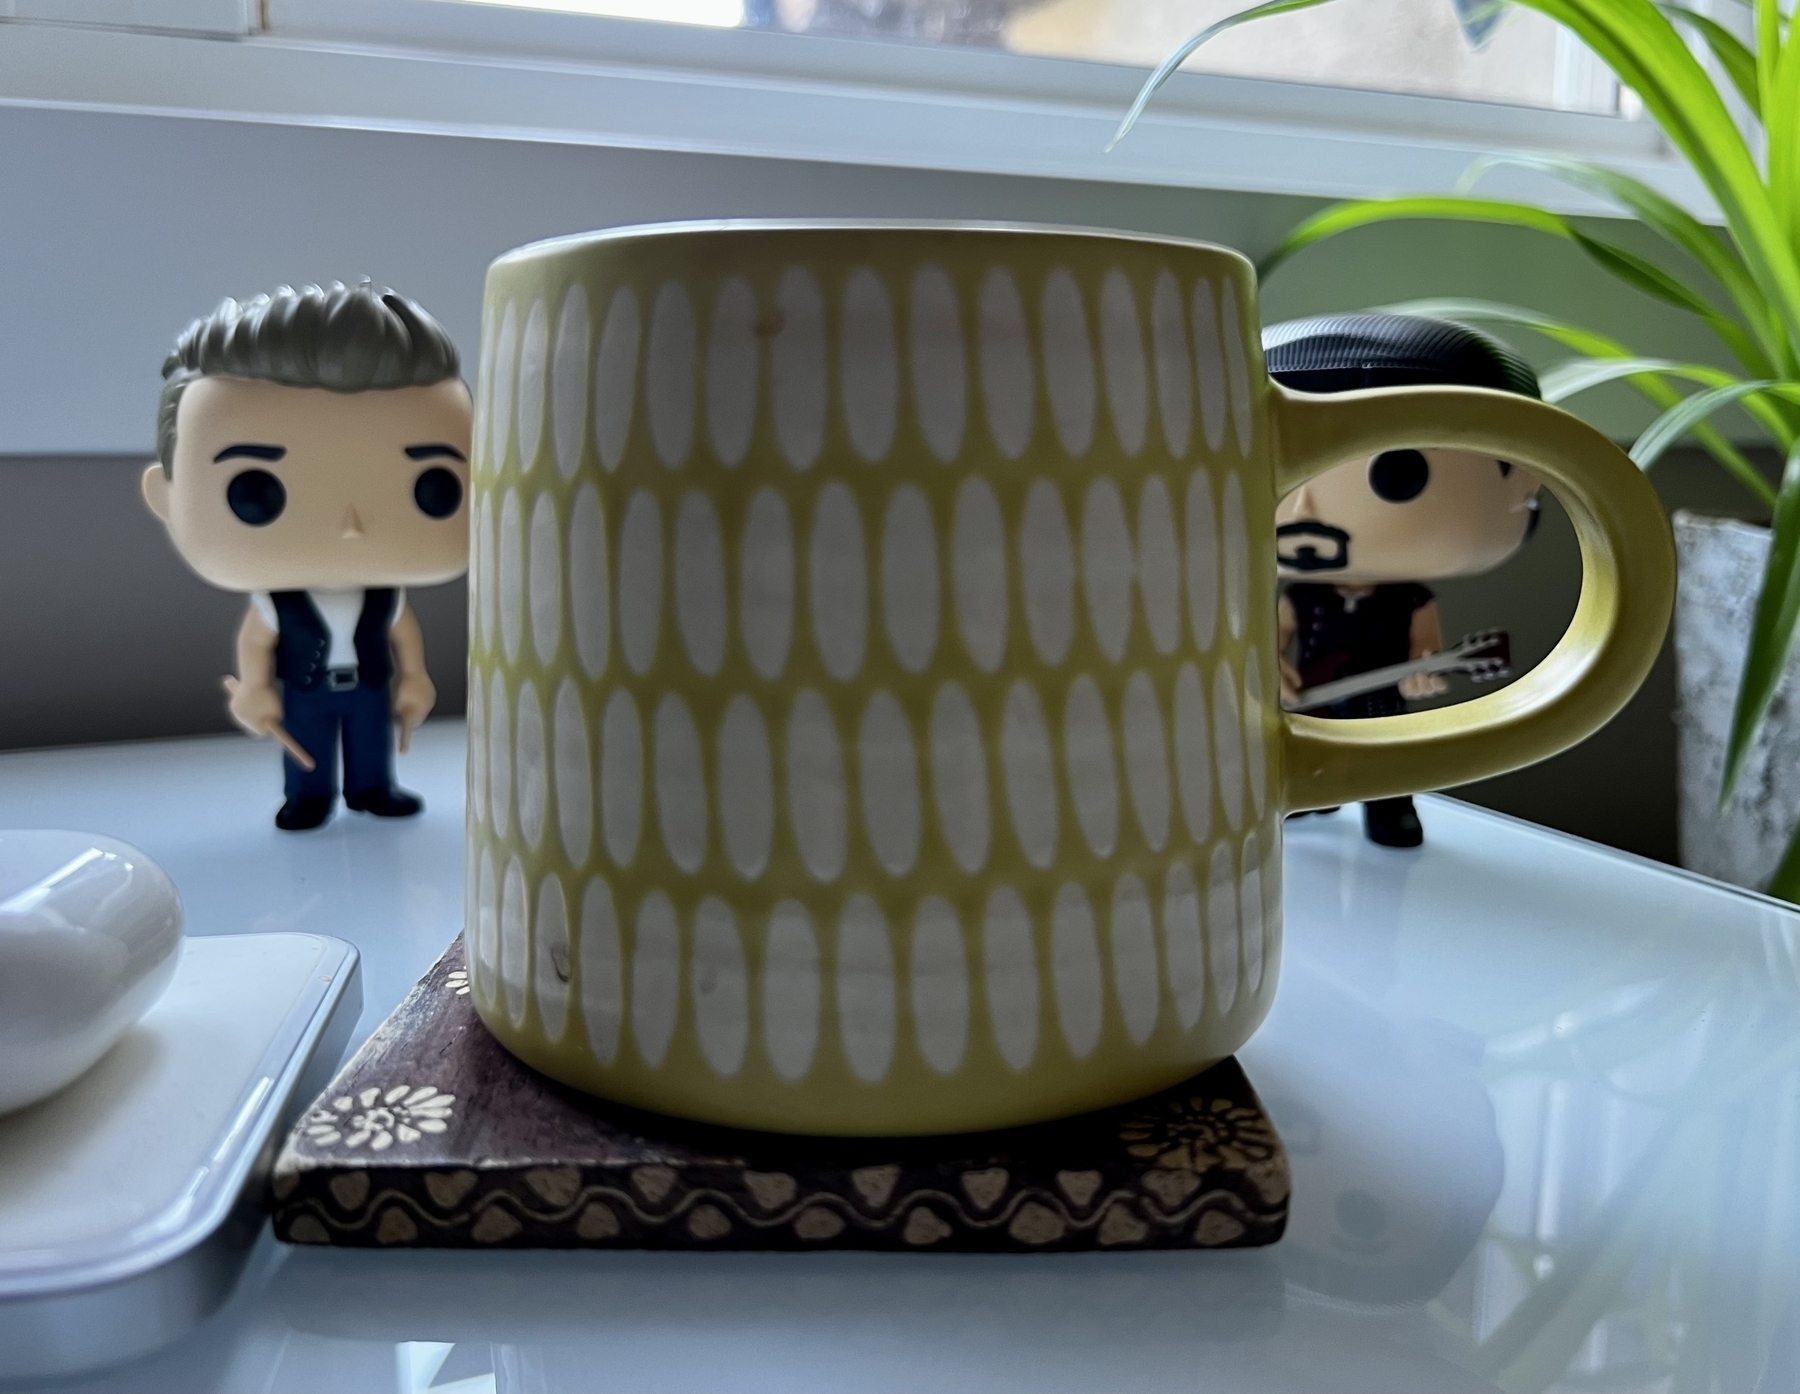 A yellow mug in the foreground with a couple of members of U2 as Funko Pop toys in the background.